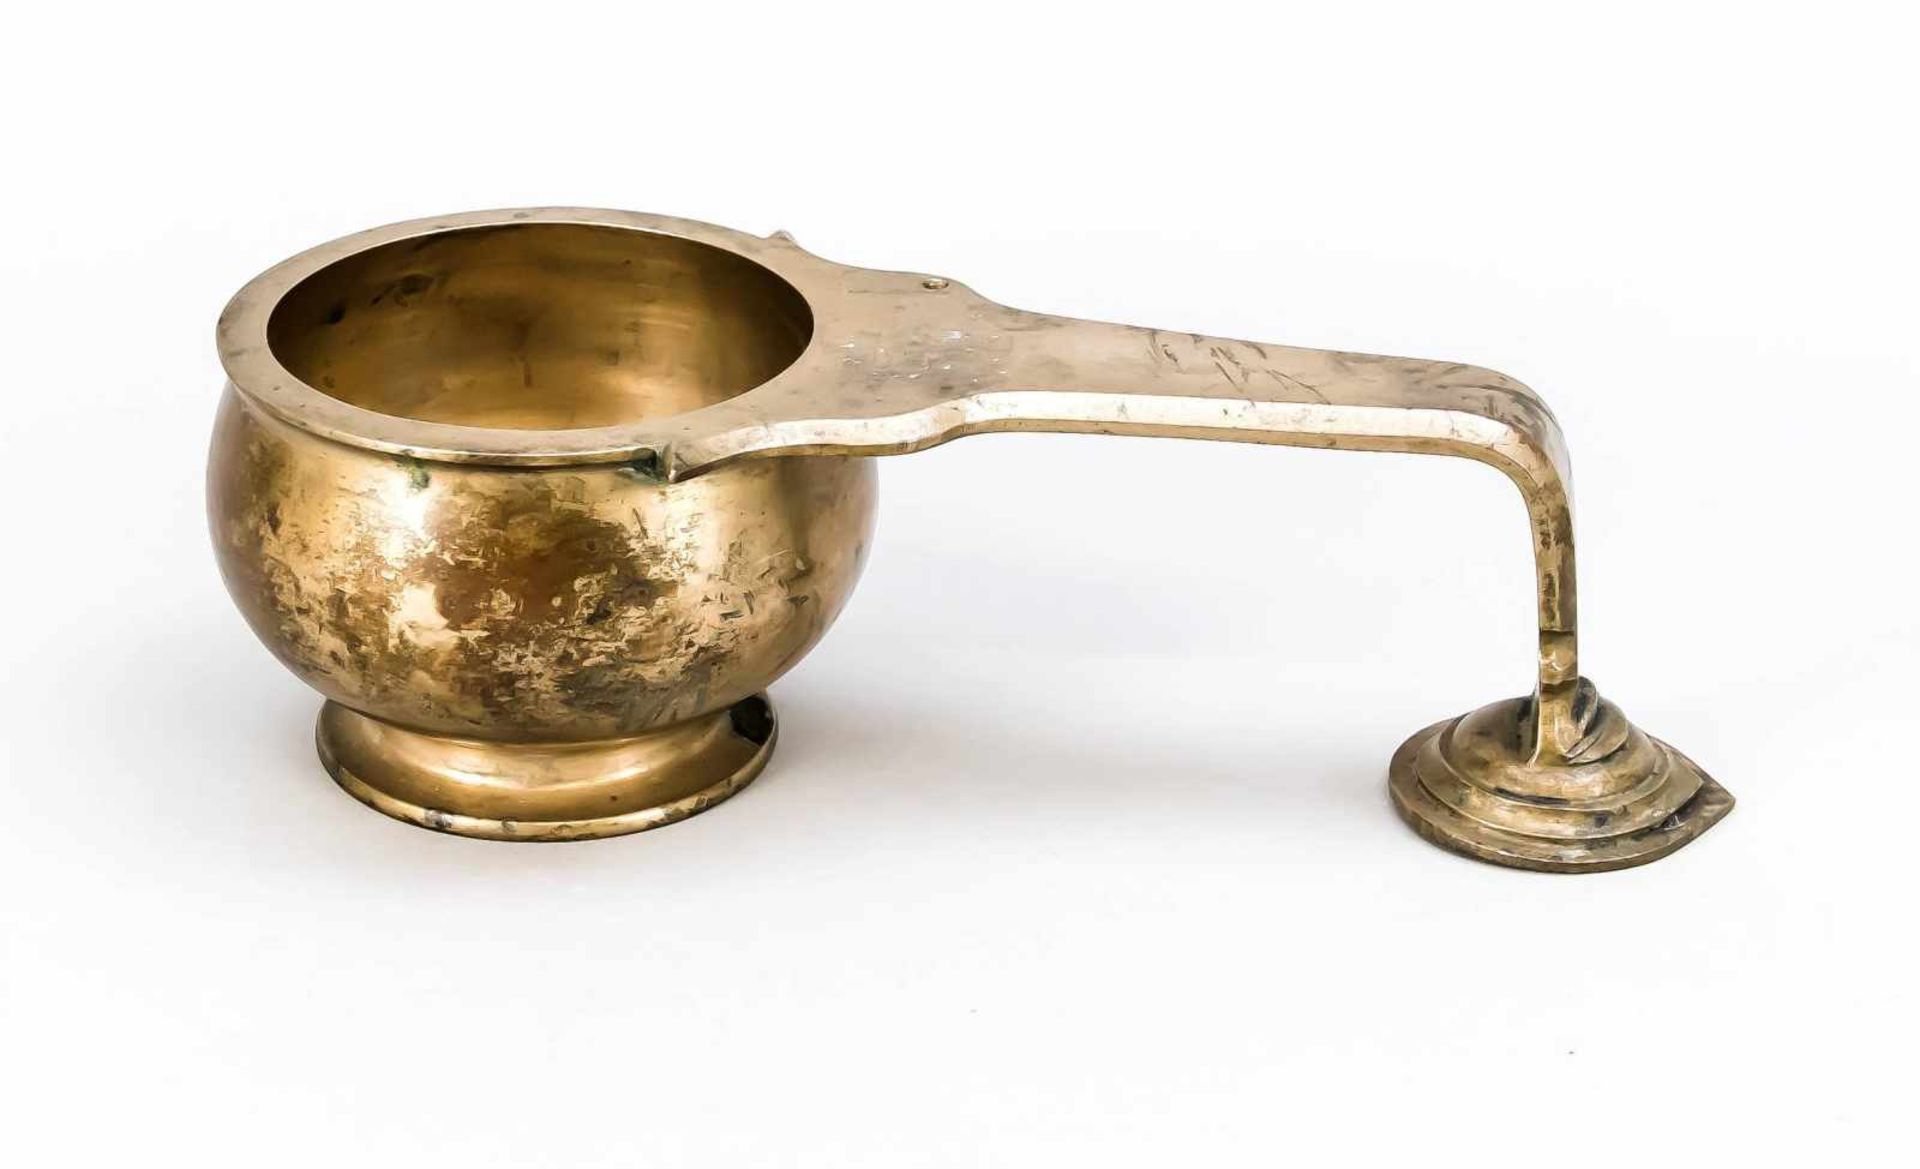 Large ritual ladle, India, 20th century, bronze with remaining gilding. Round, throated